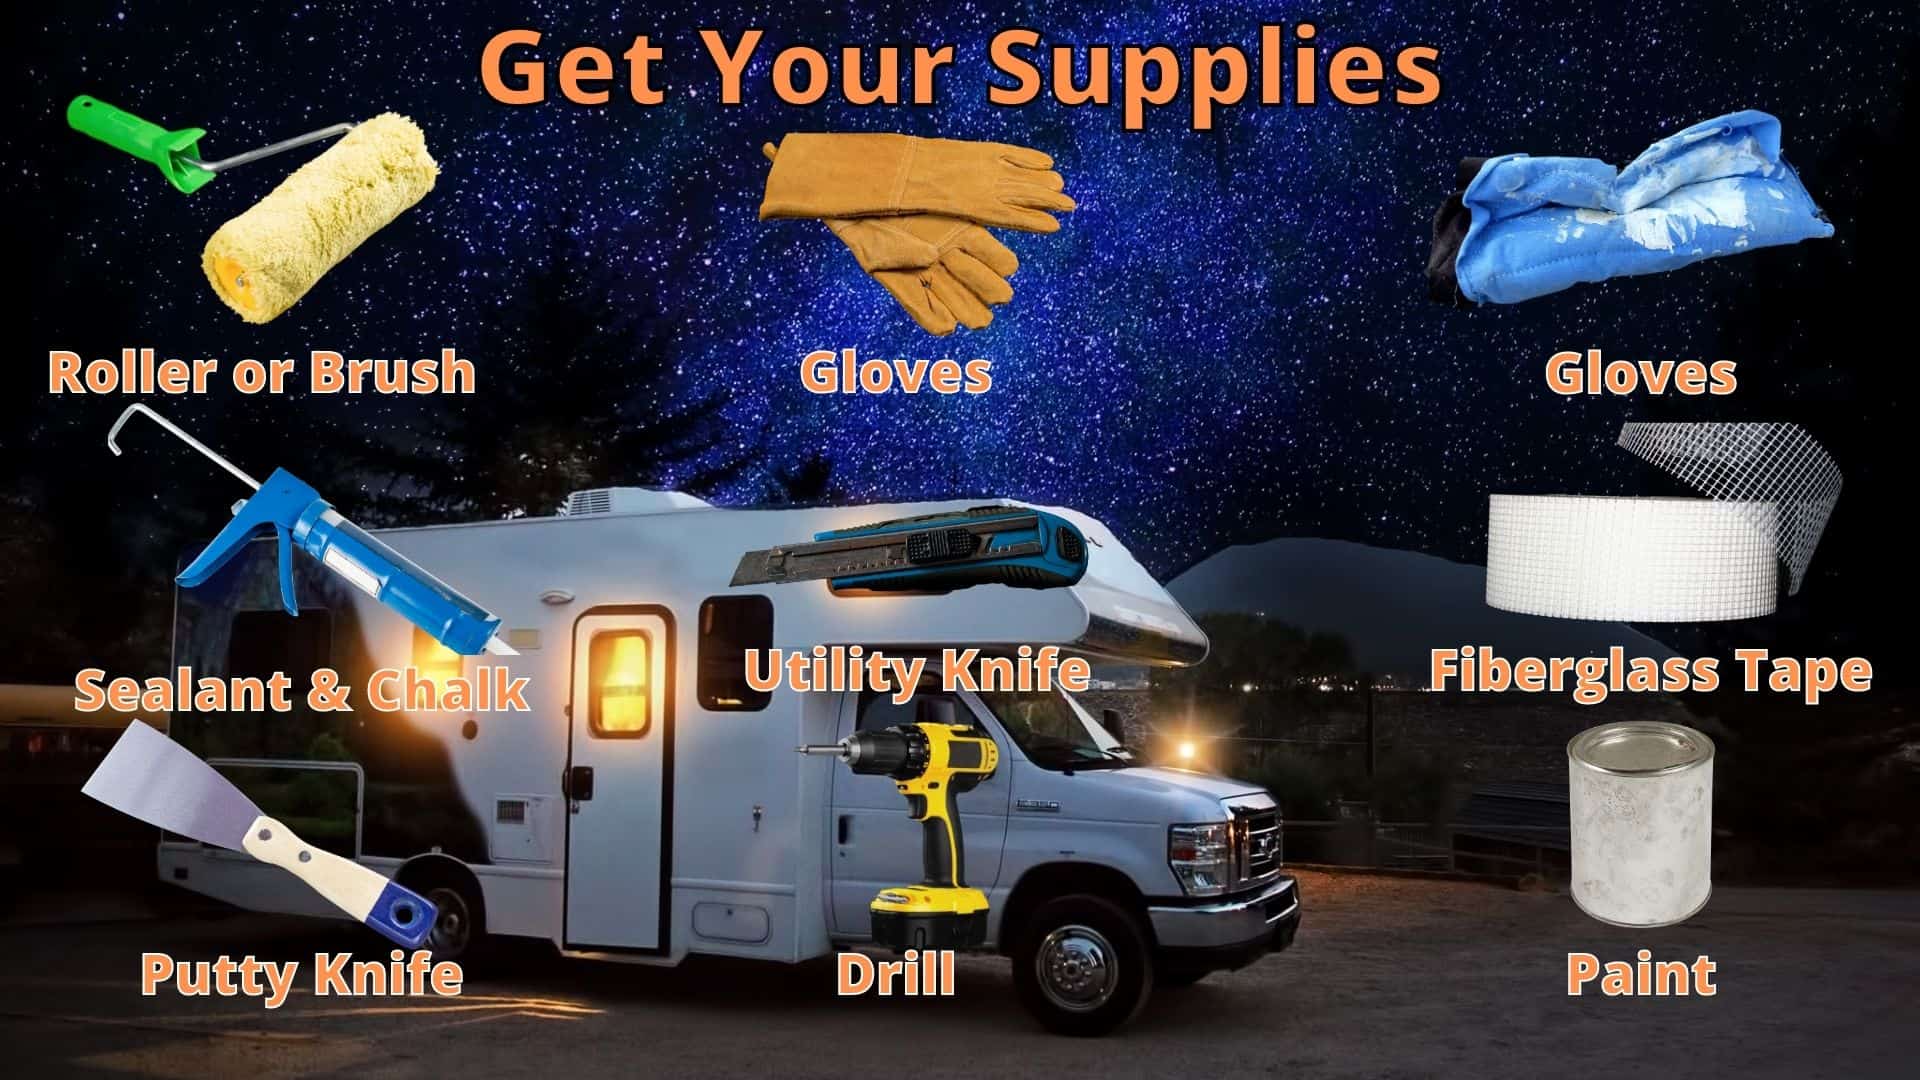 Get Your Supplies to repair RV roof